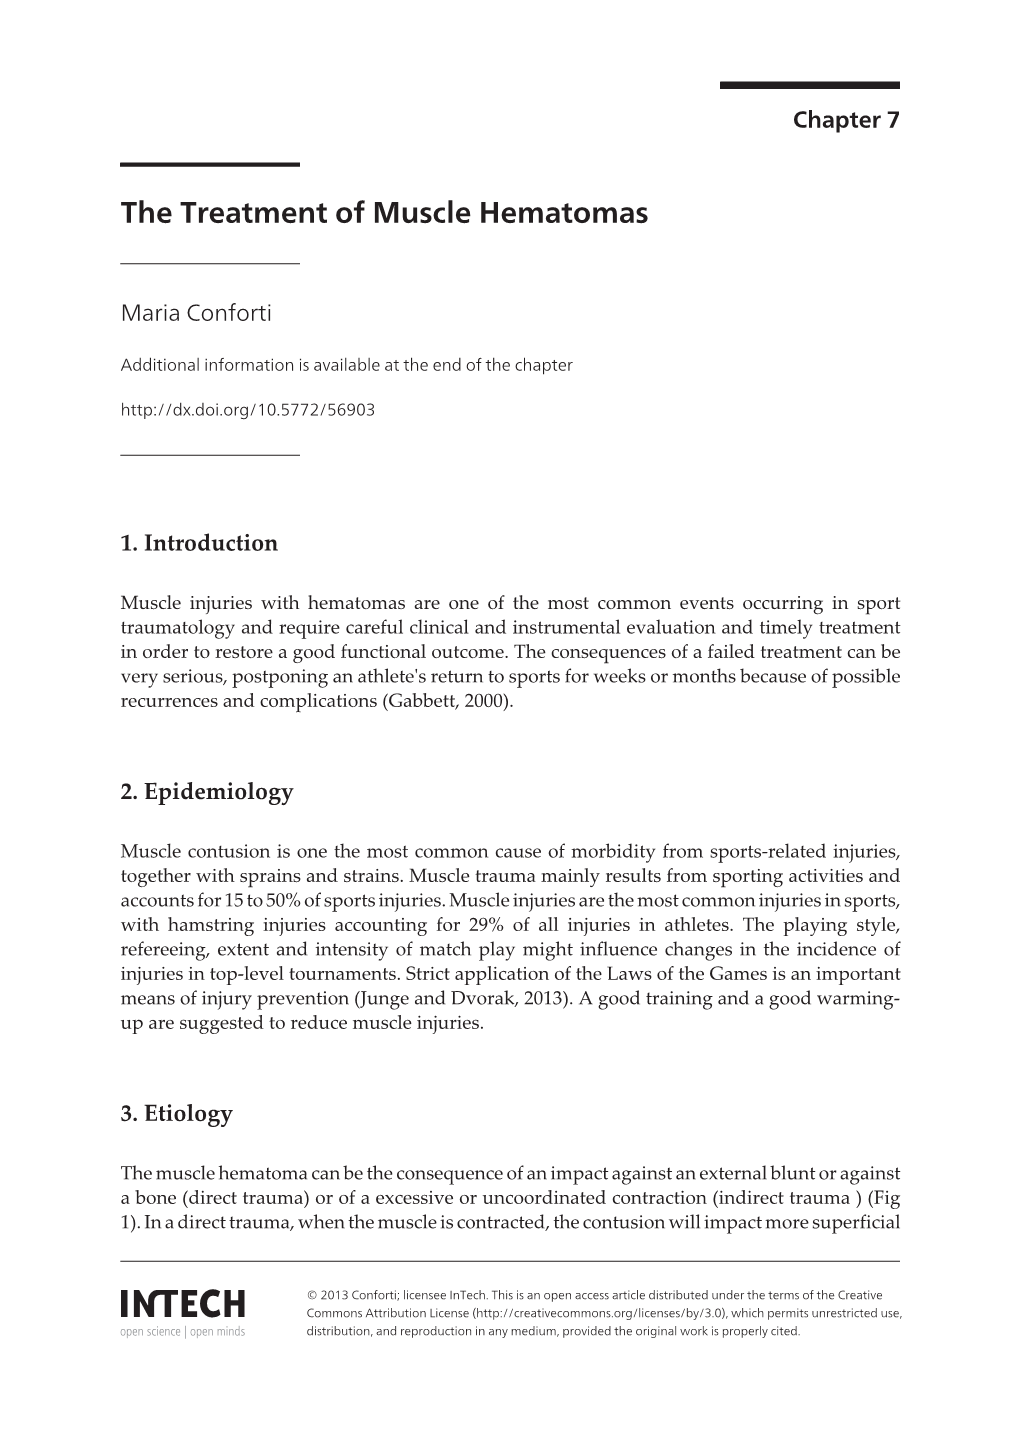 The Treatment of Muscle Hematomas